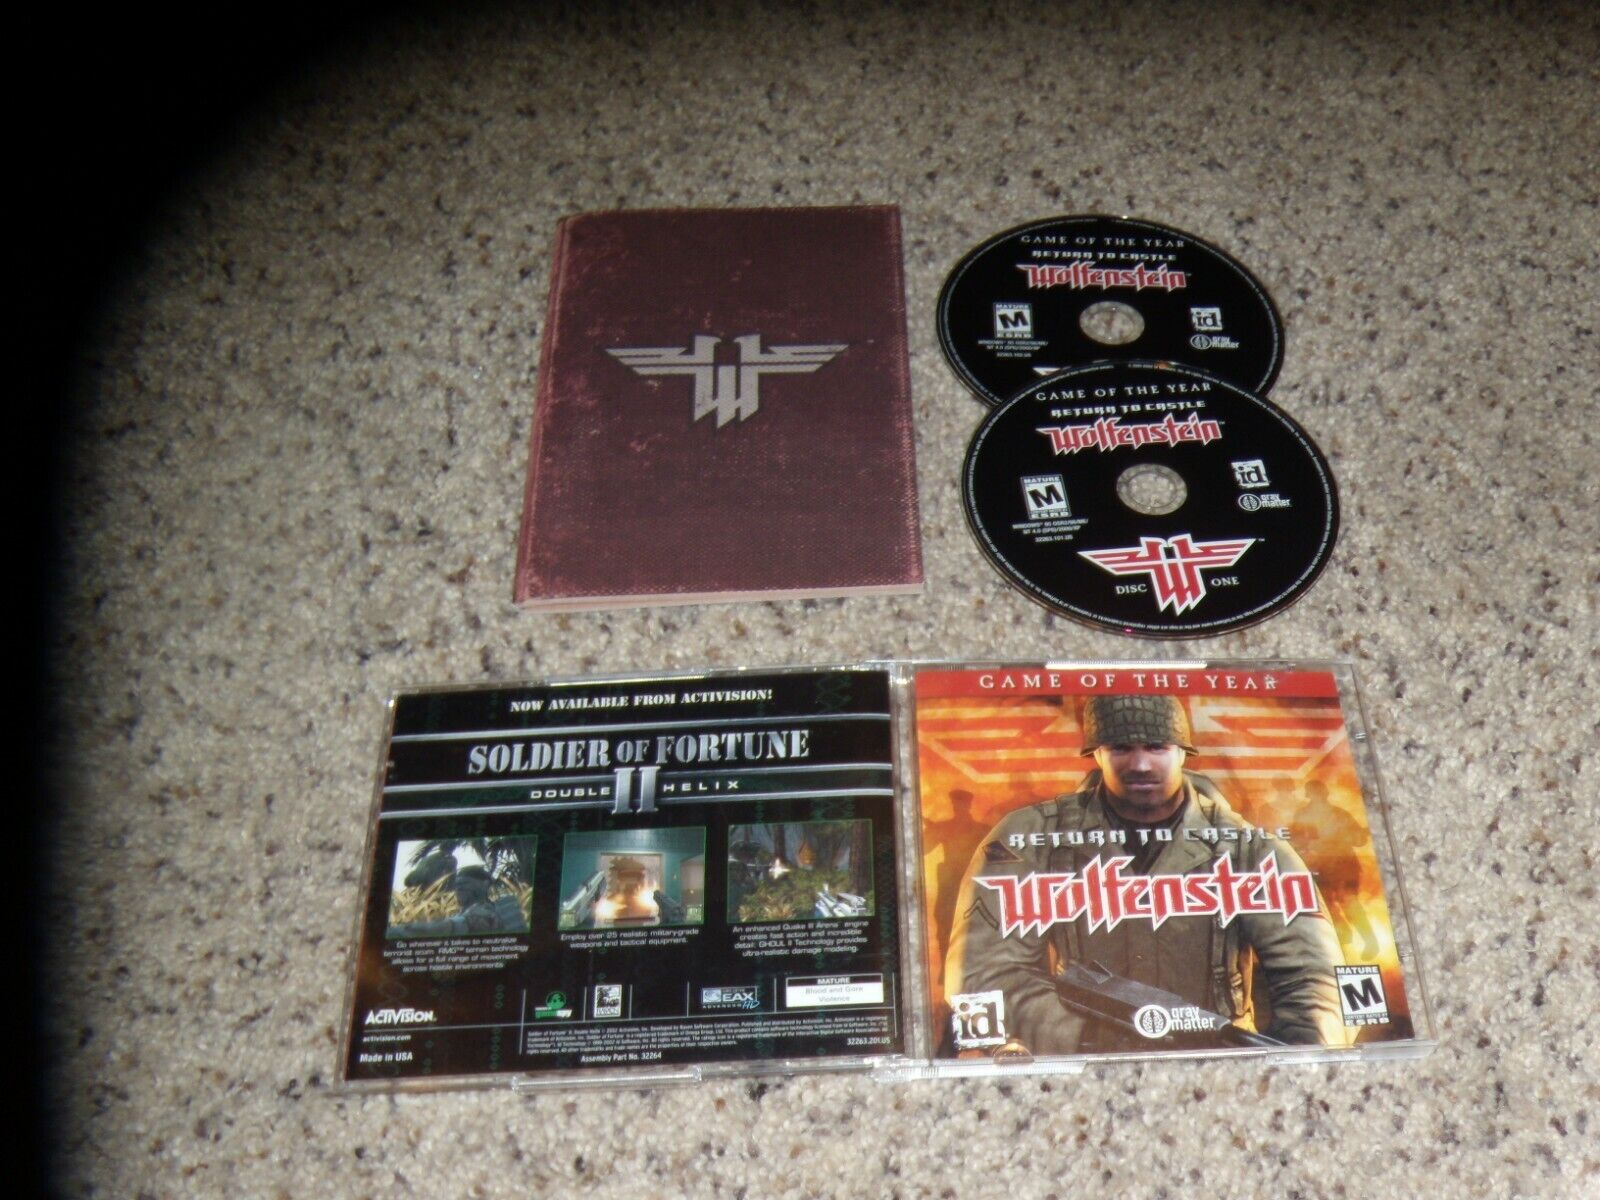 Return to Castle Wolfenstein Game of the Year (PC, 2002) with manual